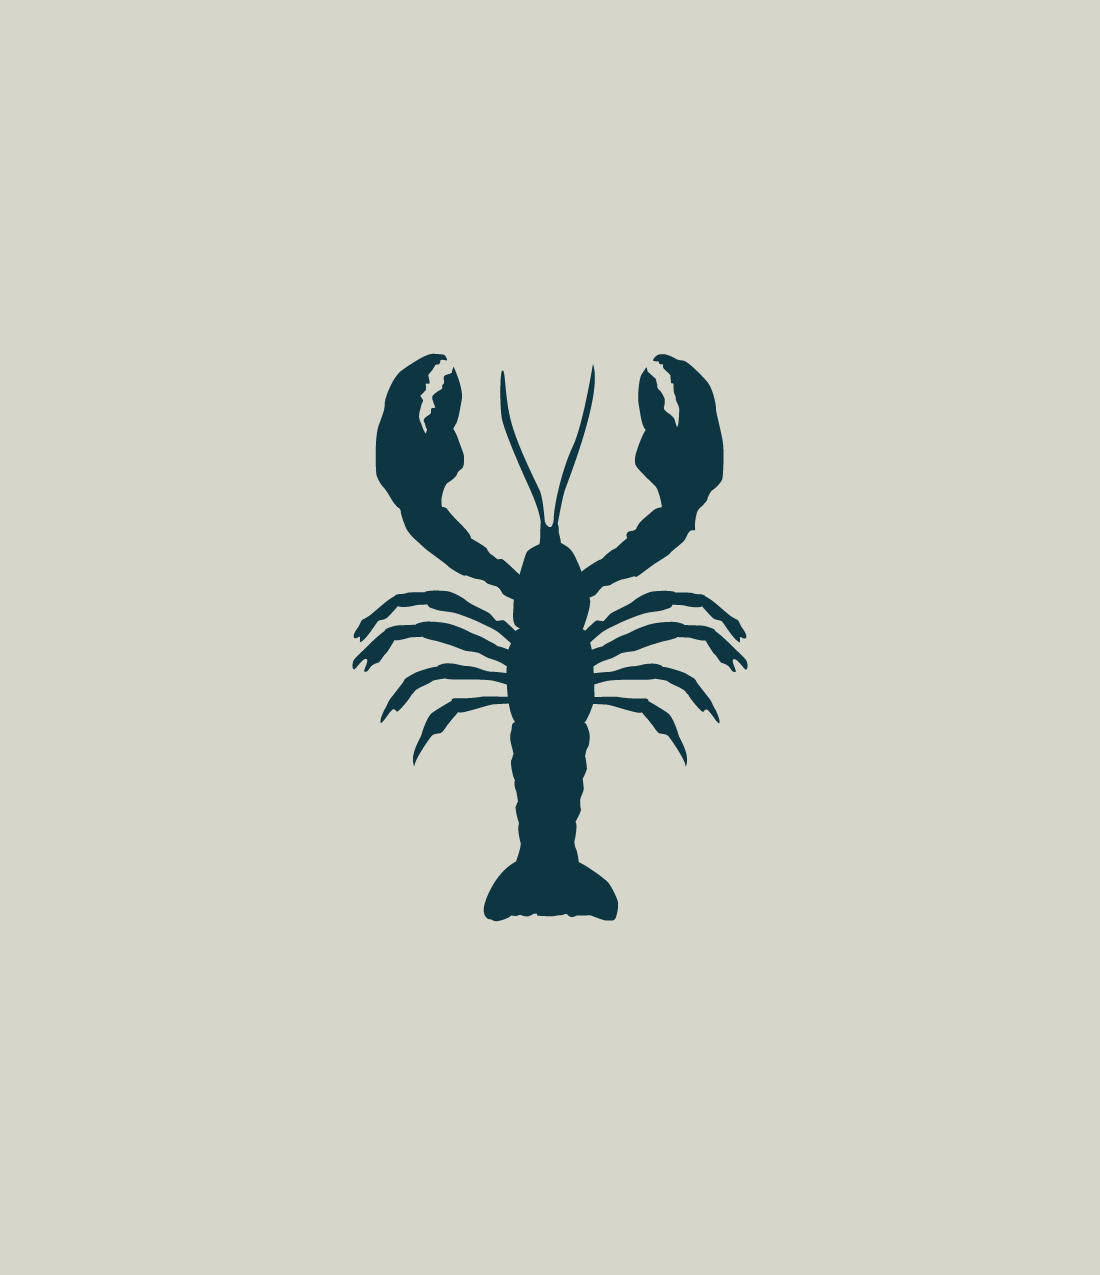 Lobster Drawing | Free download on ClipArtMag